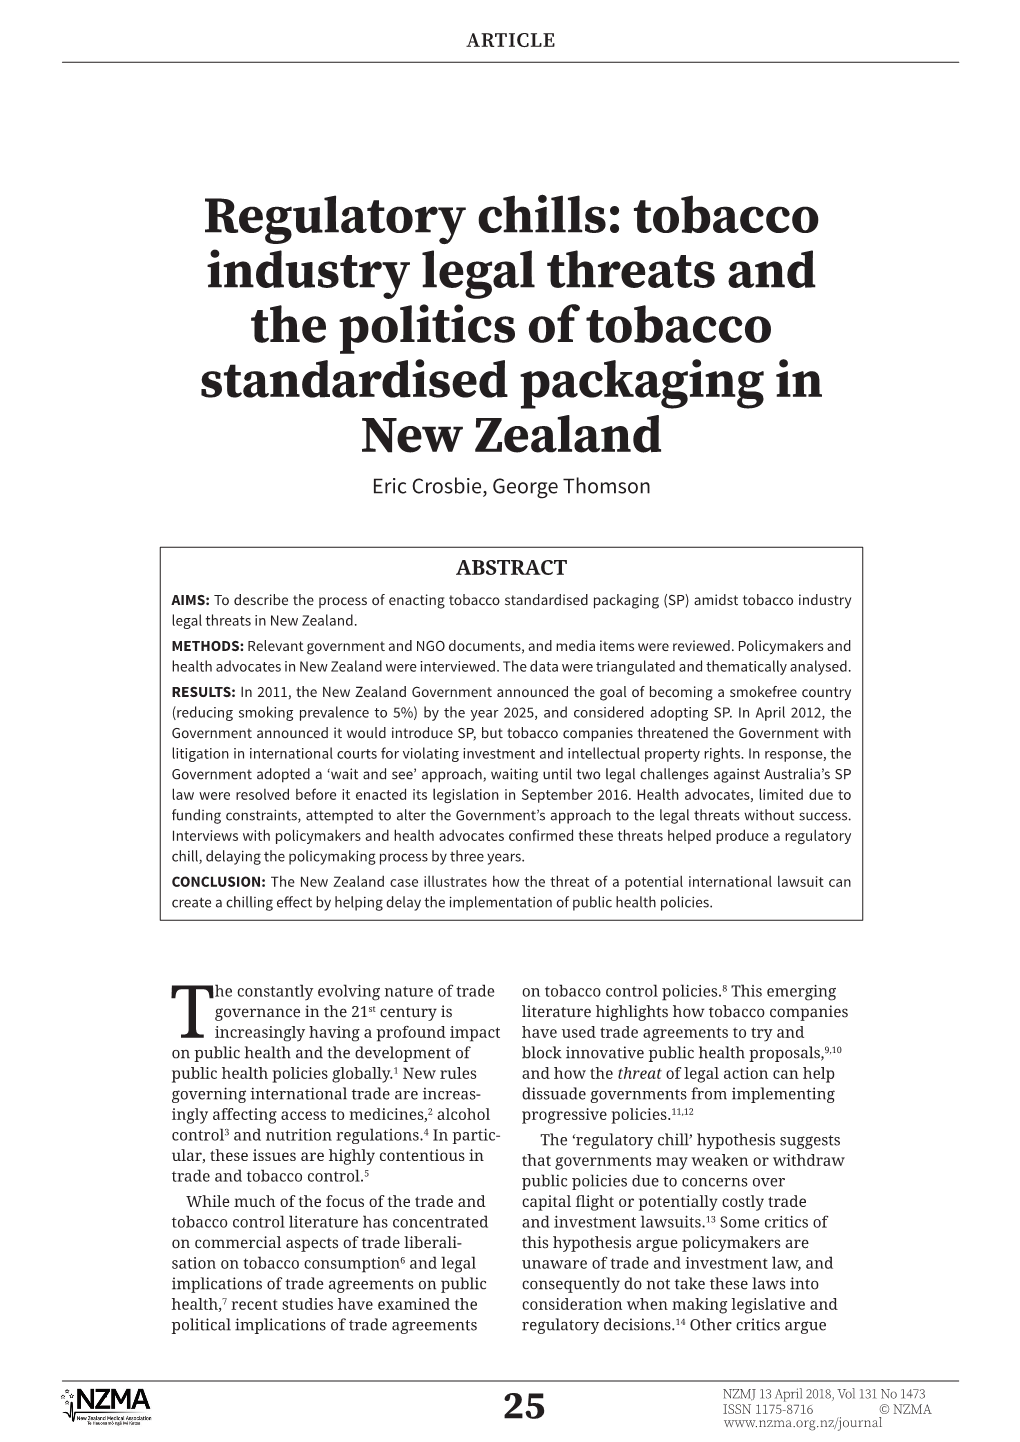 Regulatory Chills: Tobacco Industry Legal Threats and the Politics of Tobacco Standardised Packaging in New Zealand Eric Crosbie, George Thomson